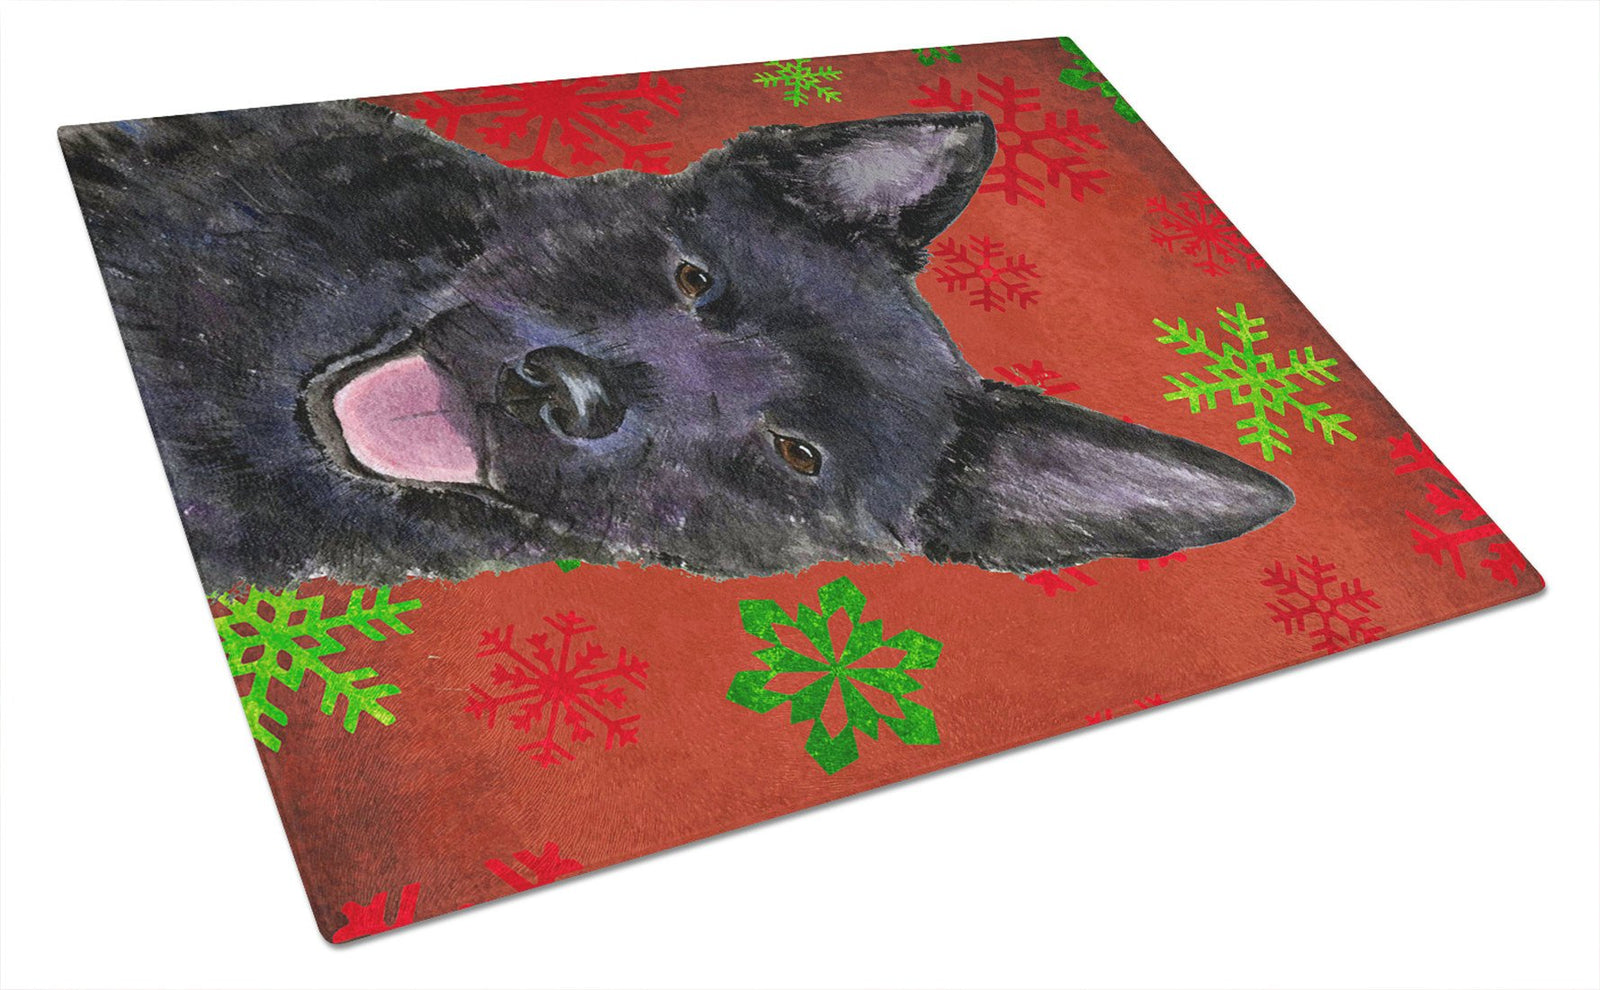 Australian Kelpie Red and Green Snowflakes Christmas Glass Cutting Board Large by Caroline's Treasures